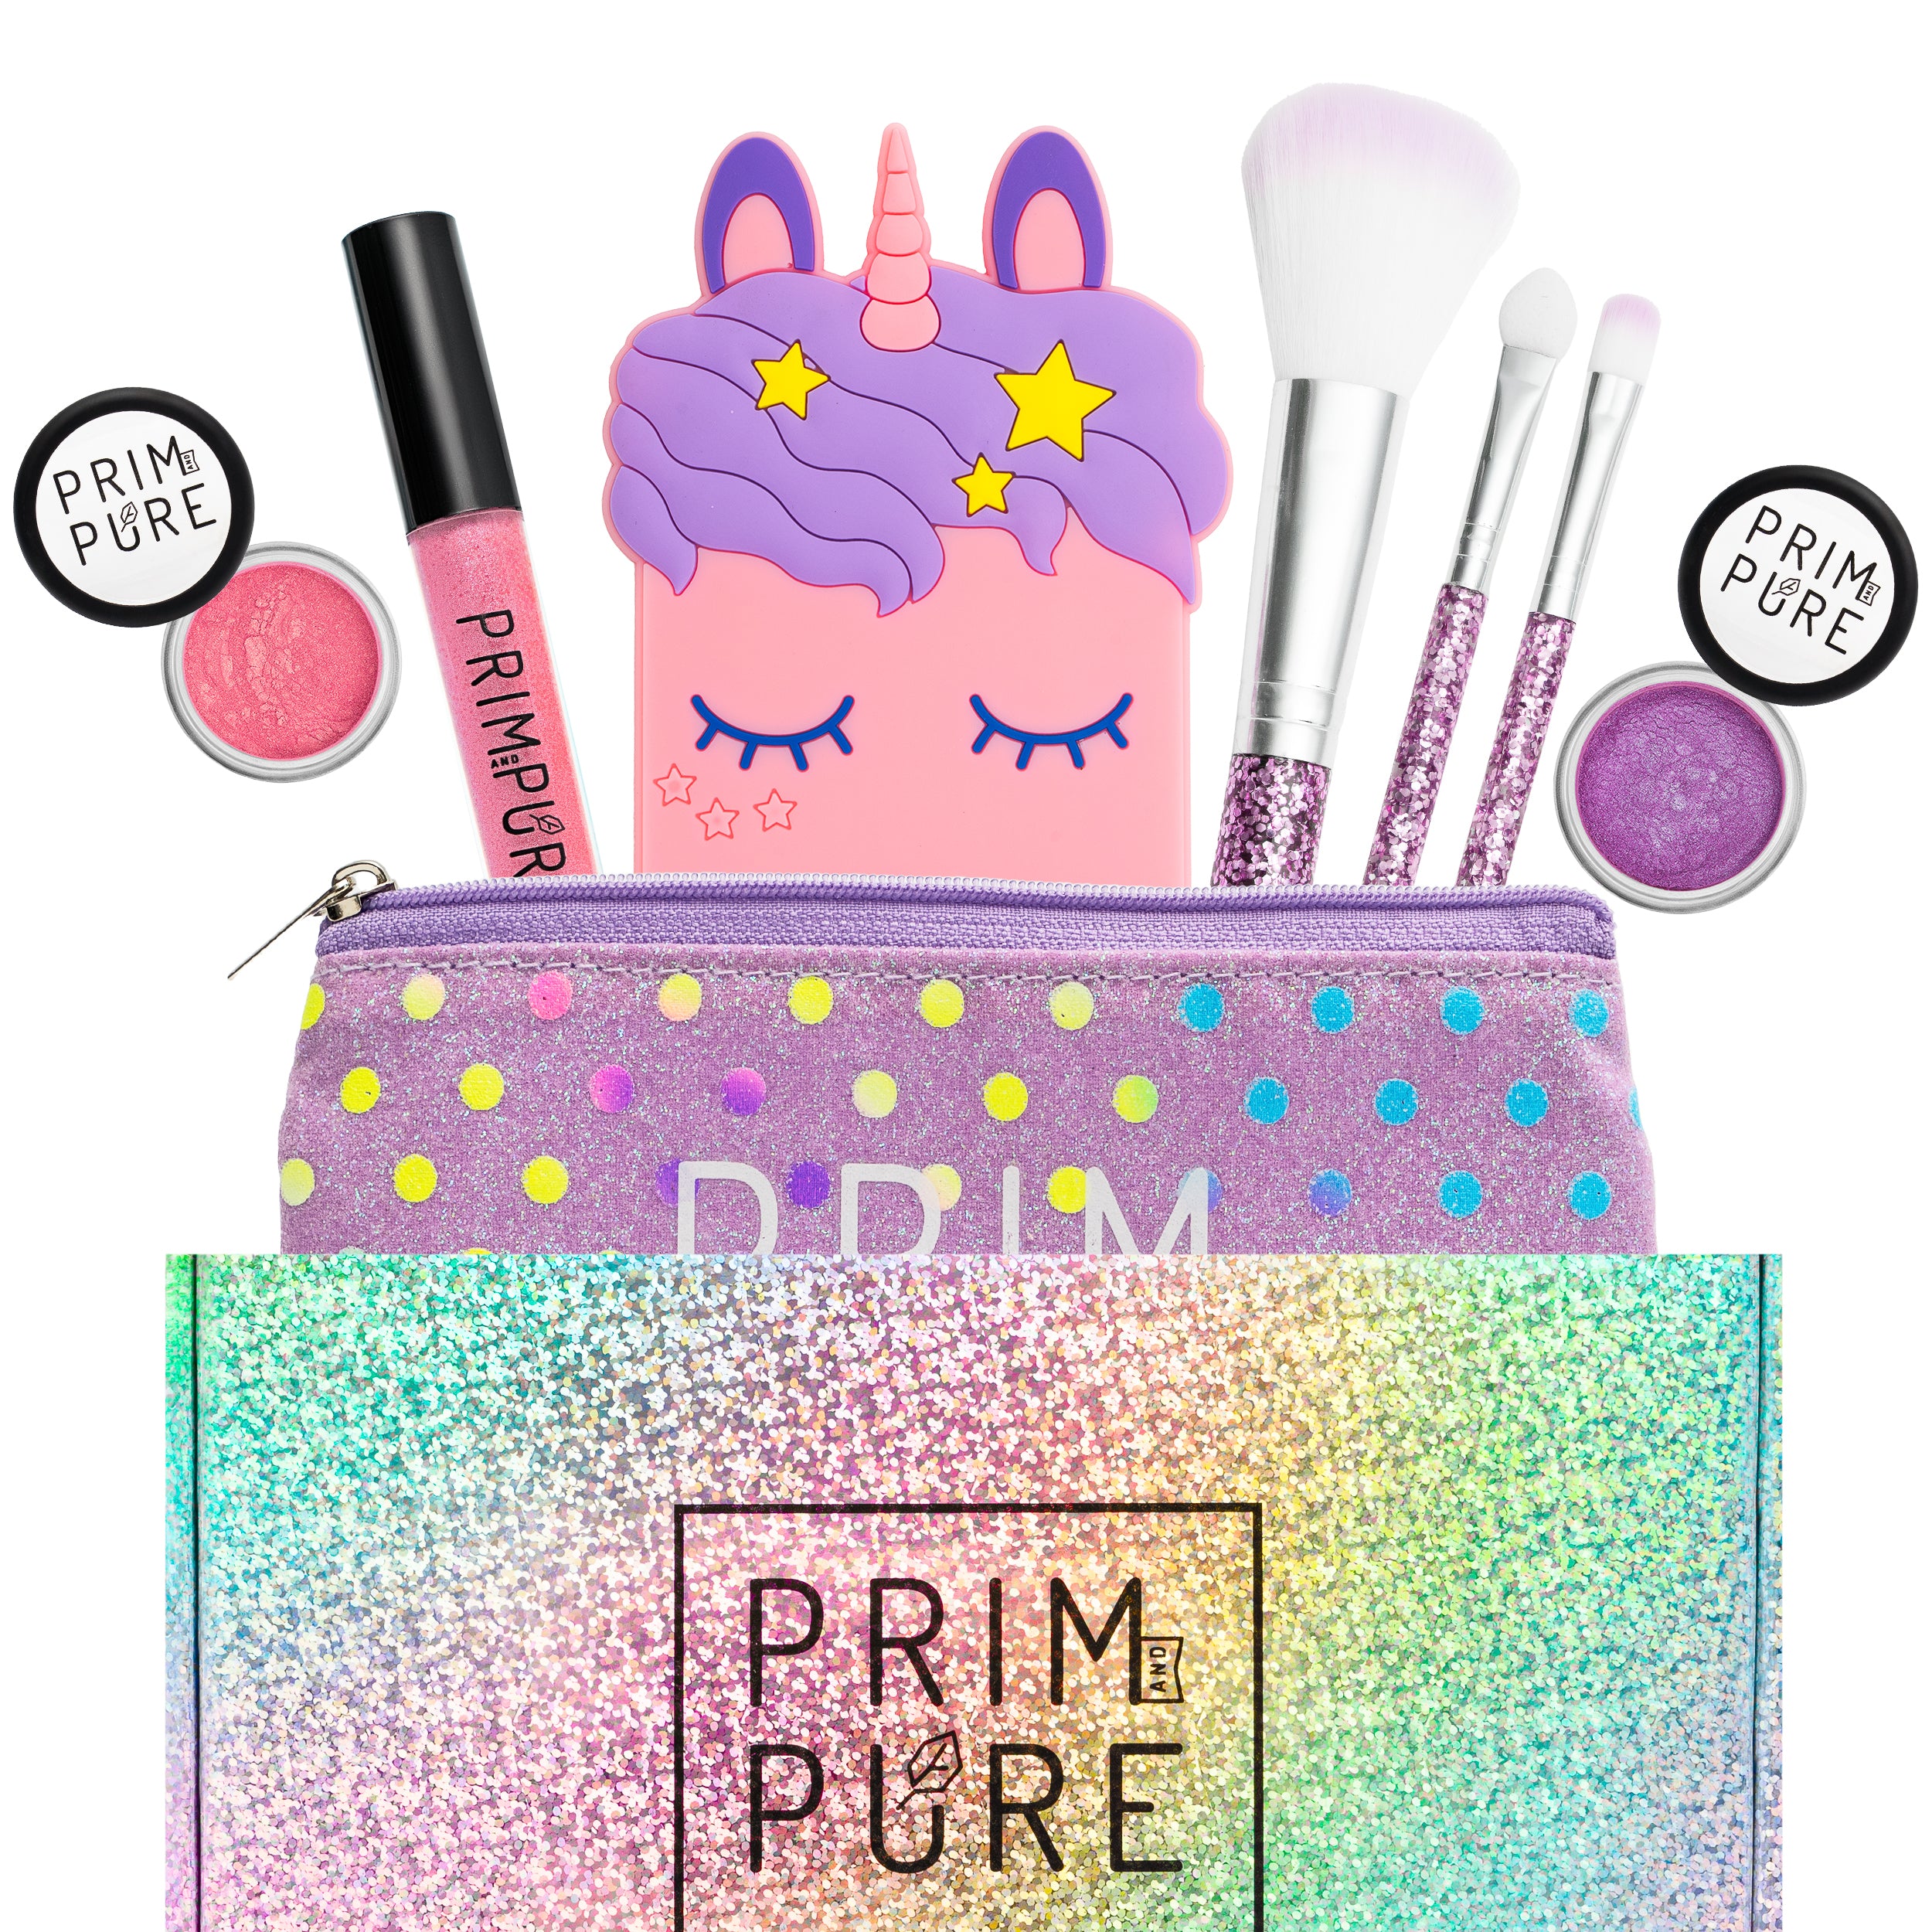 Kids makeup kit - Can my child use my makeup, or do I need to buy